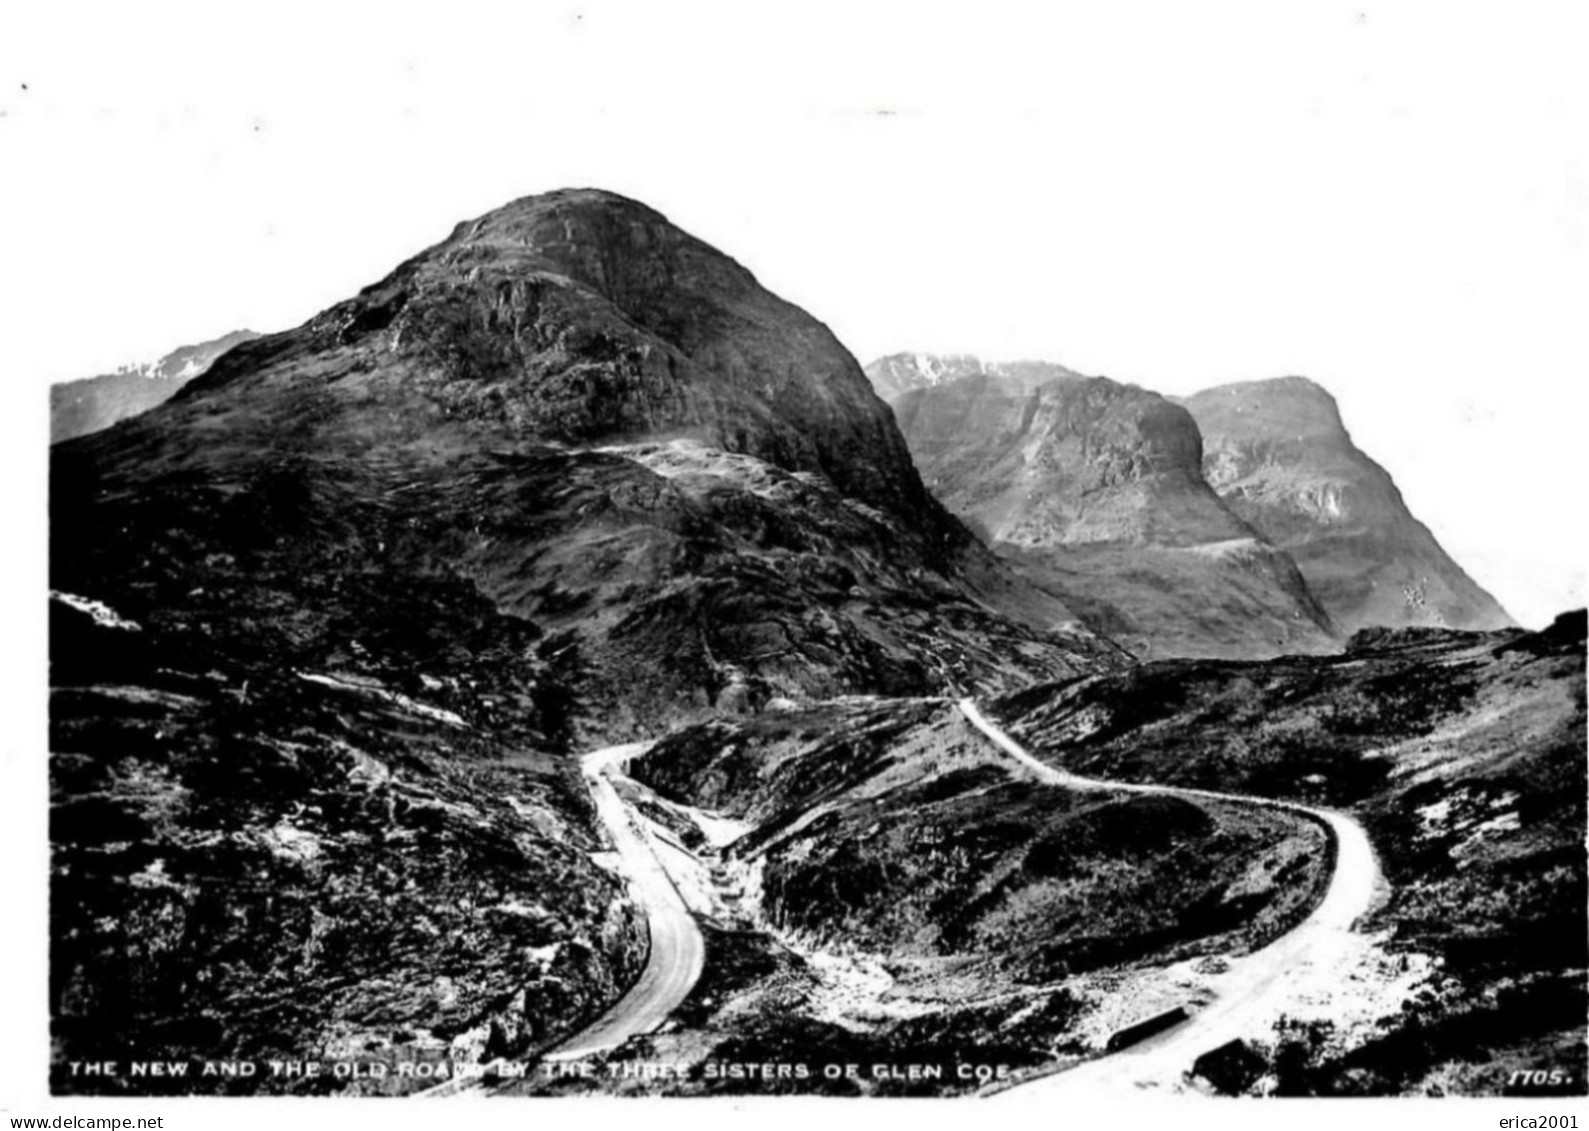 Argyllshire. Glen Coe. The New And The Old Road By Three Sisters Of Glen Coe. - Argyllshire